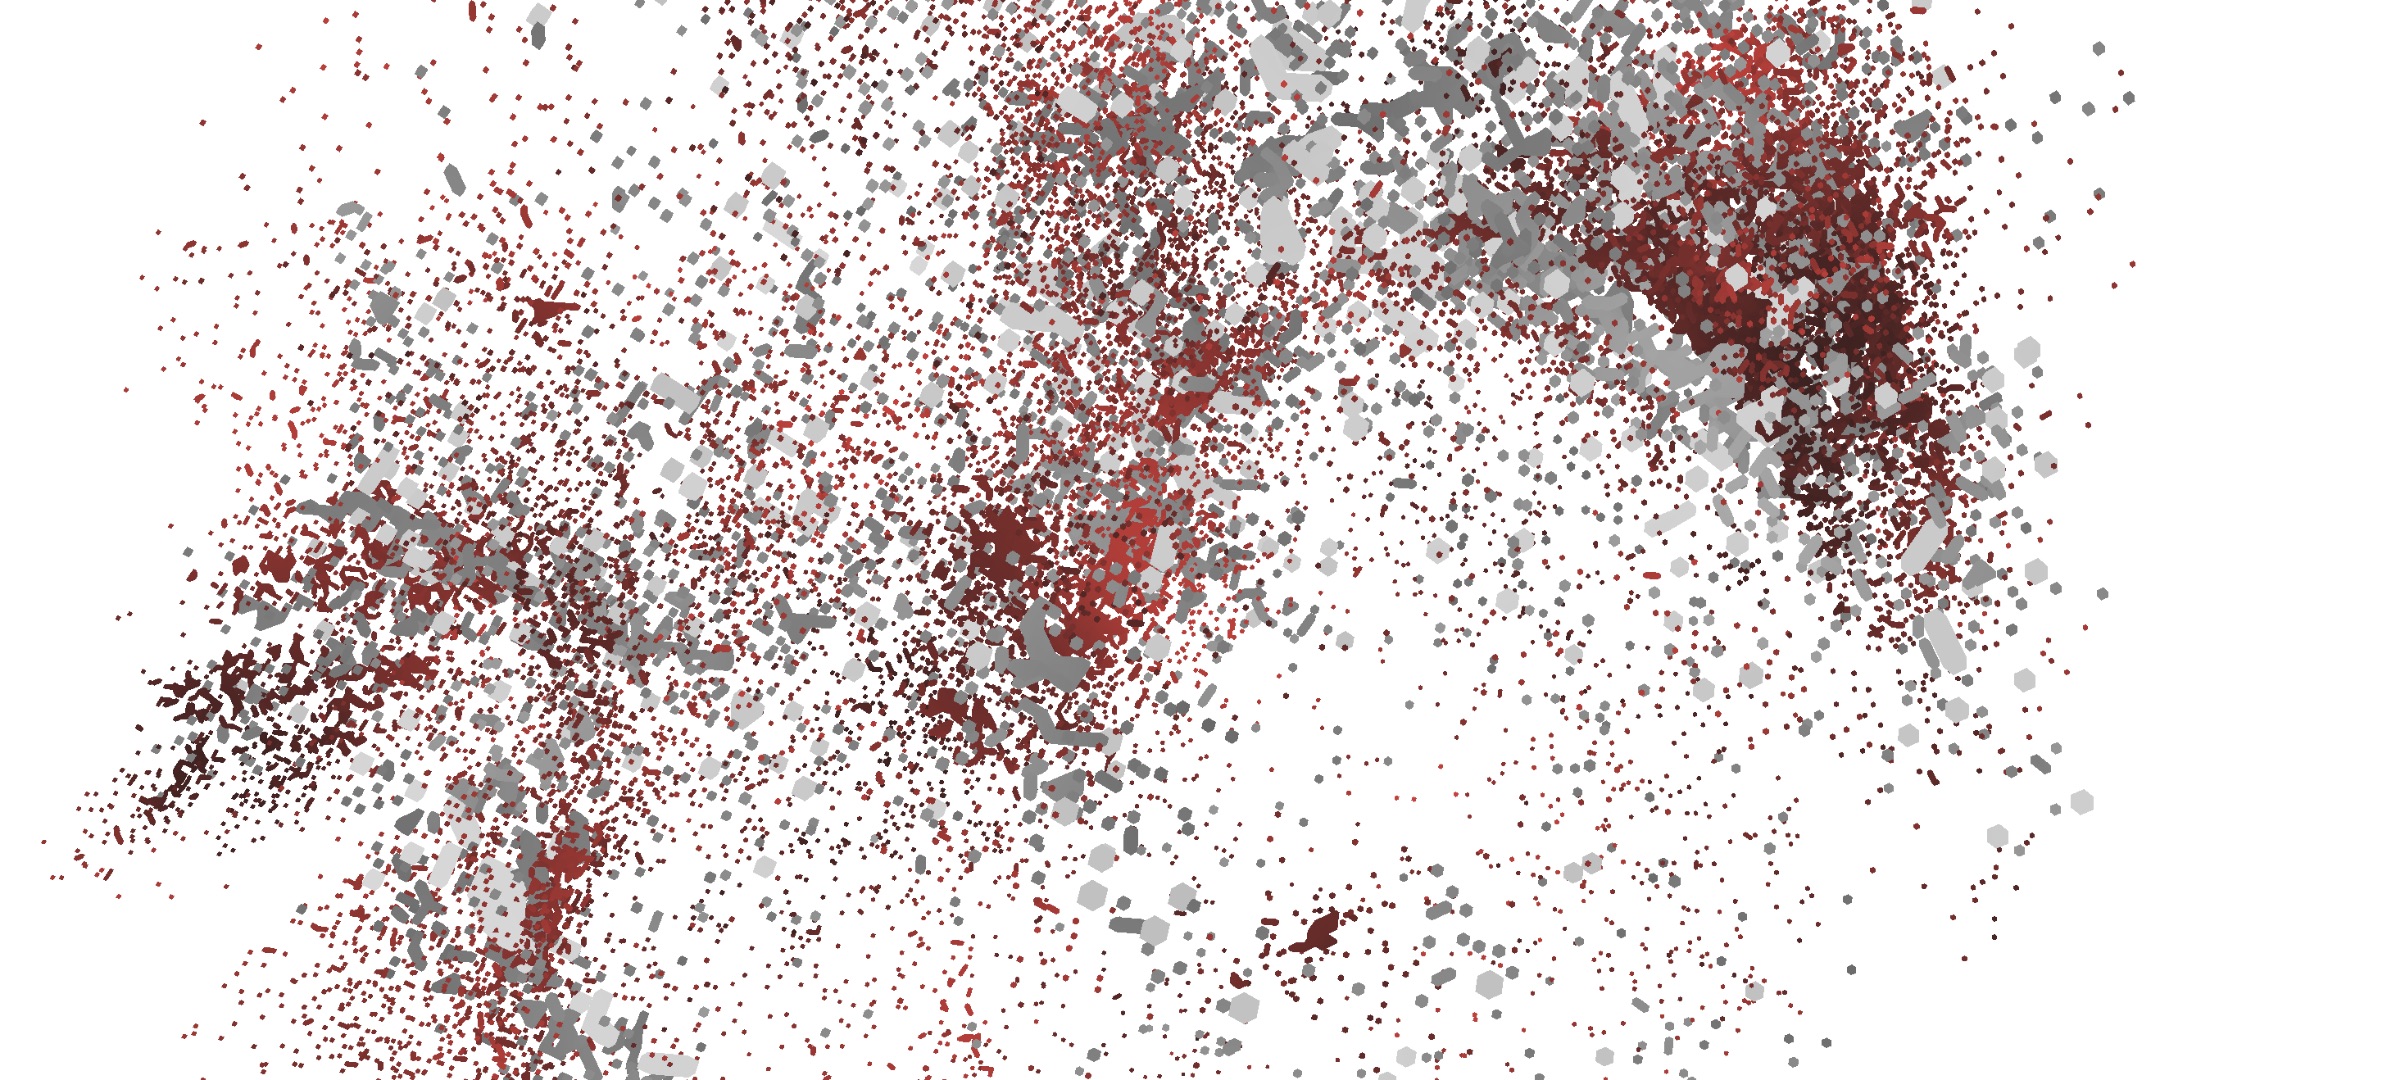 A detail of Google's graph. The smallest dots represent single network nodes, while larger clusters are formed around subnets which have many local nodes.